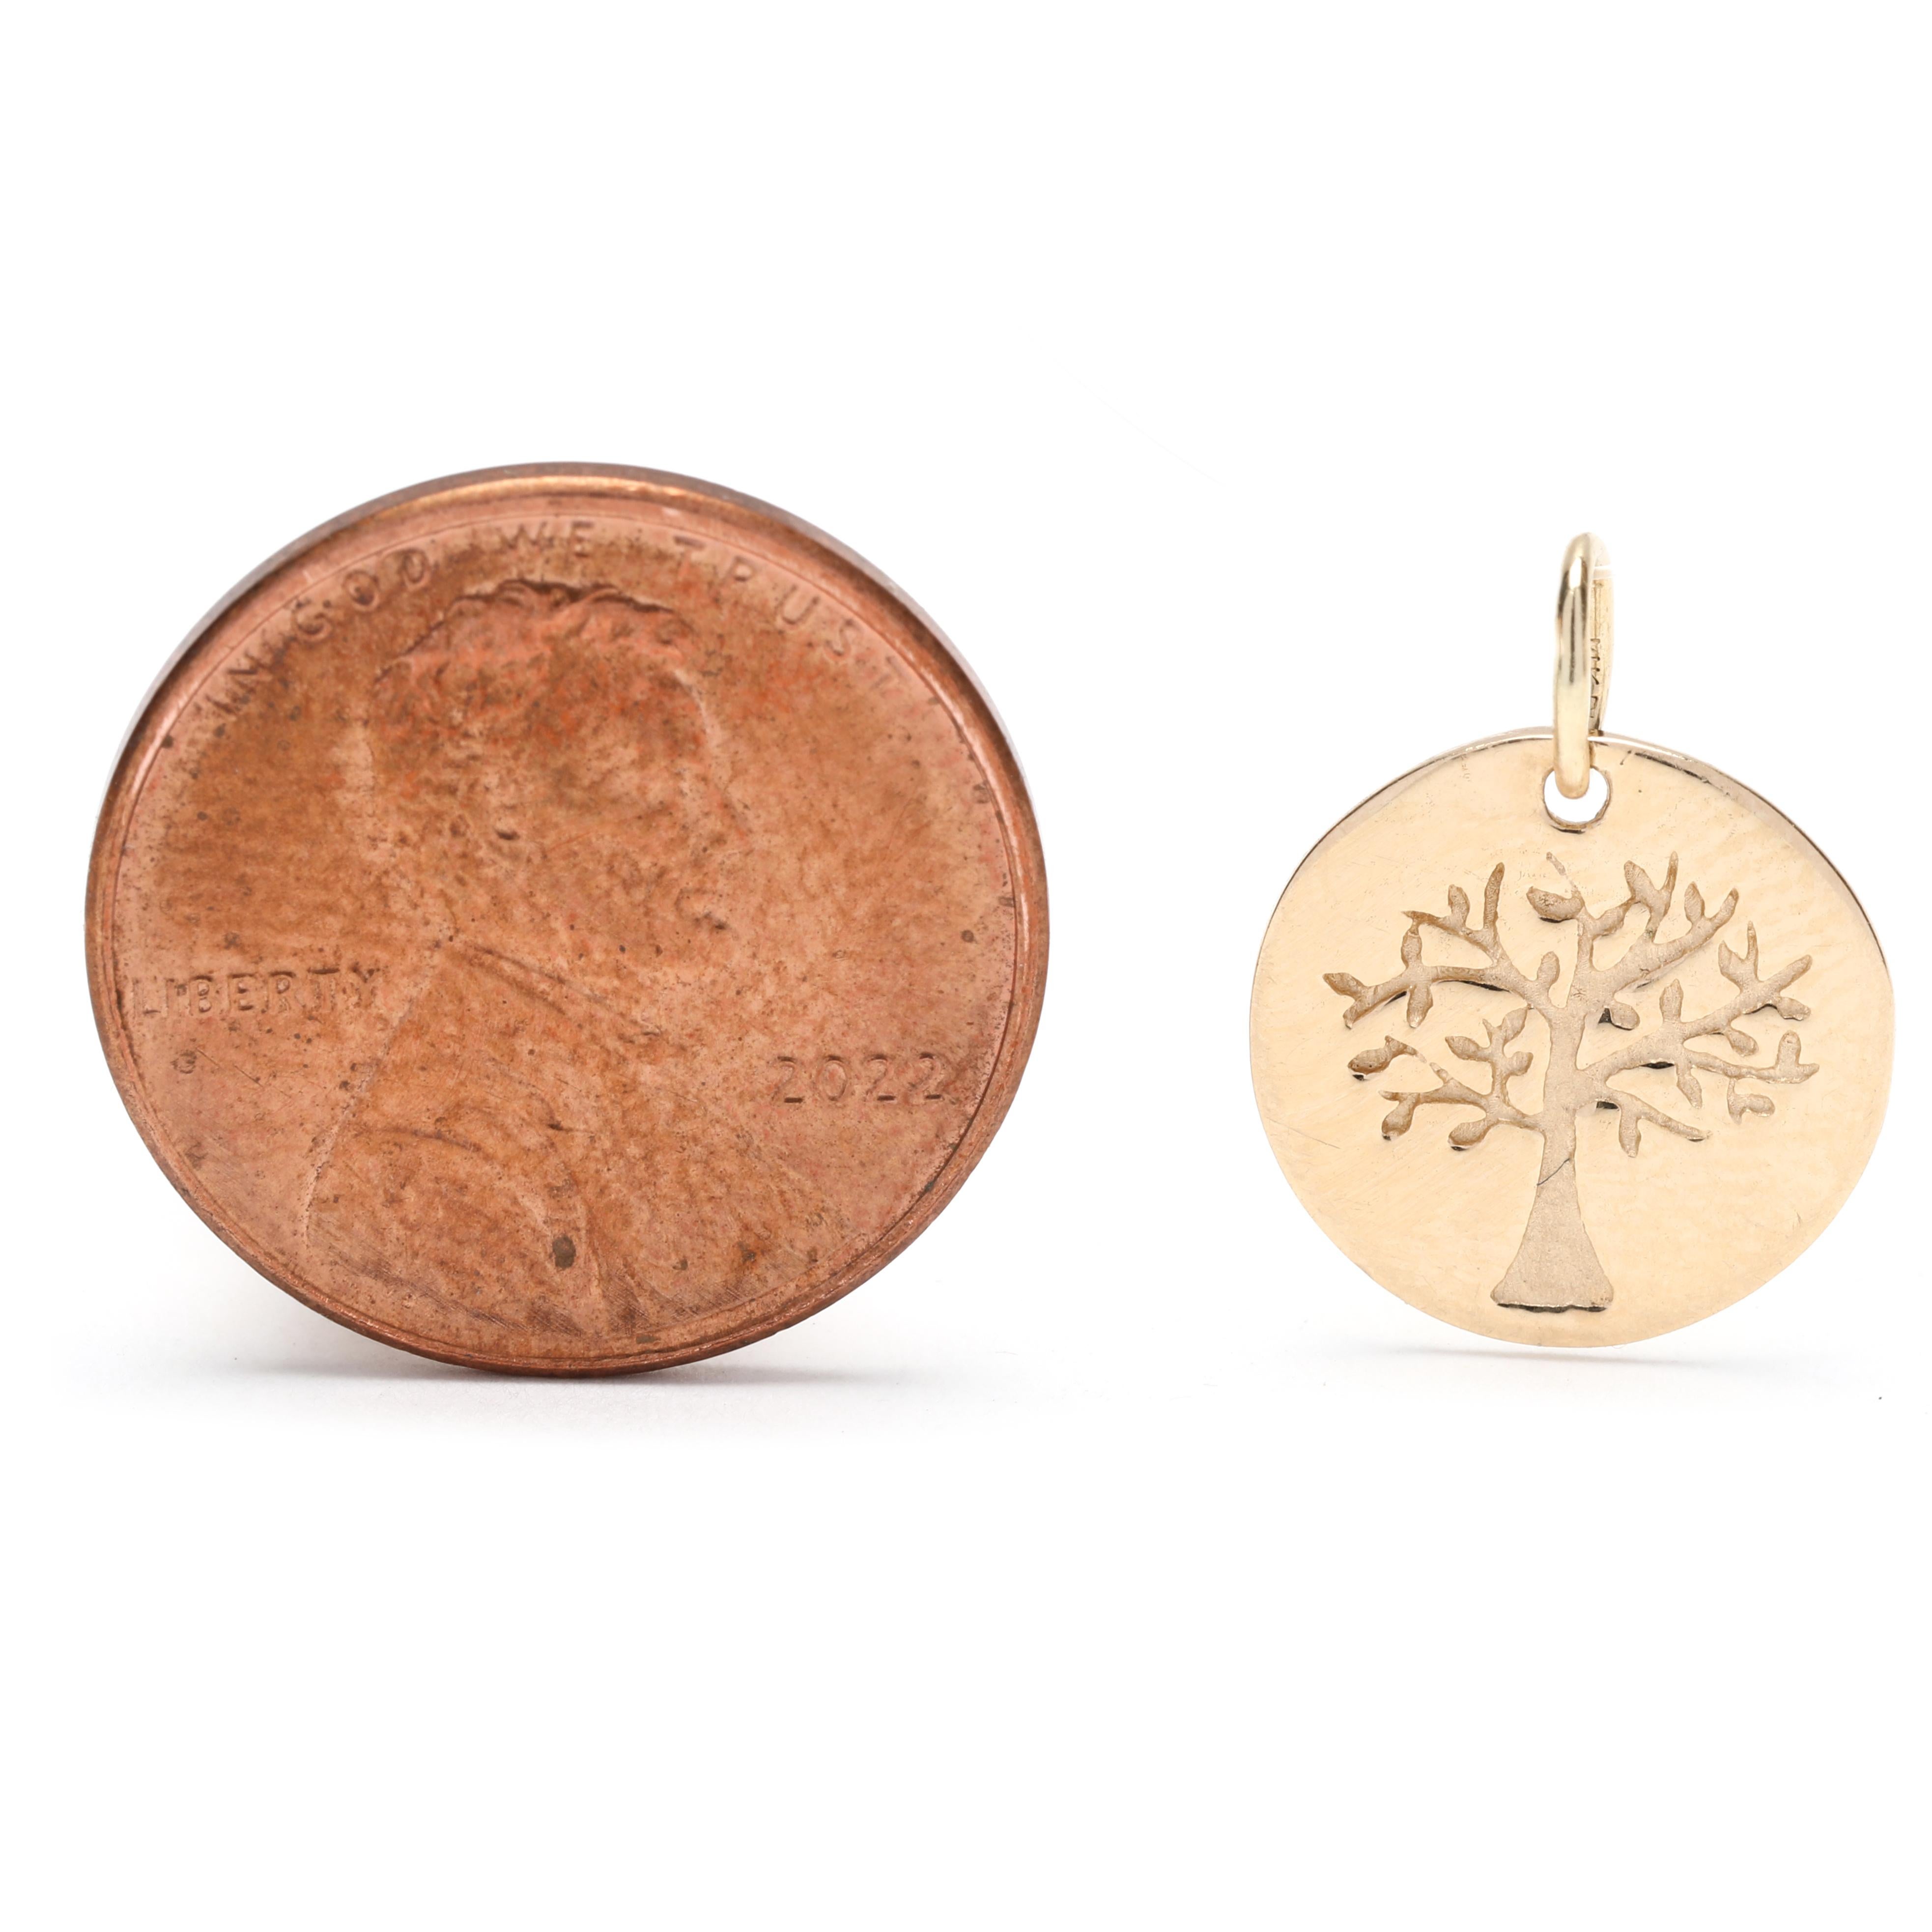 This 10K yellow gold Tree Of Life disc charm is a unique and stylish way to show off your love of nature. Crafted from solid 10K gold with a polished finish, this charm measures 5/8 inch in diameter and features an engraved Tree Of Life design. This